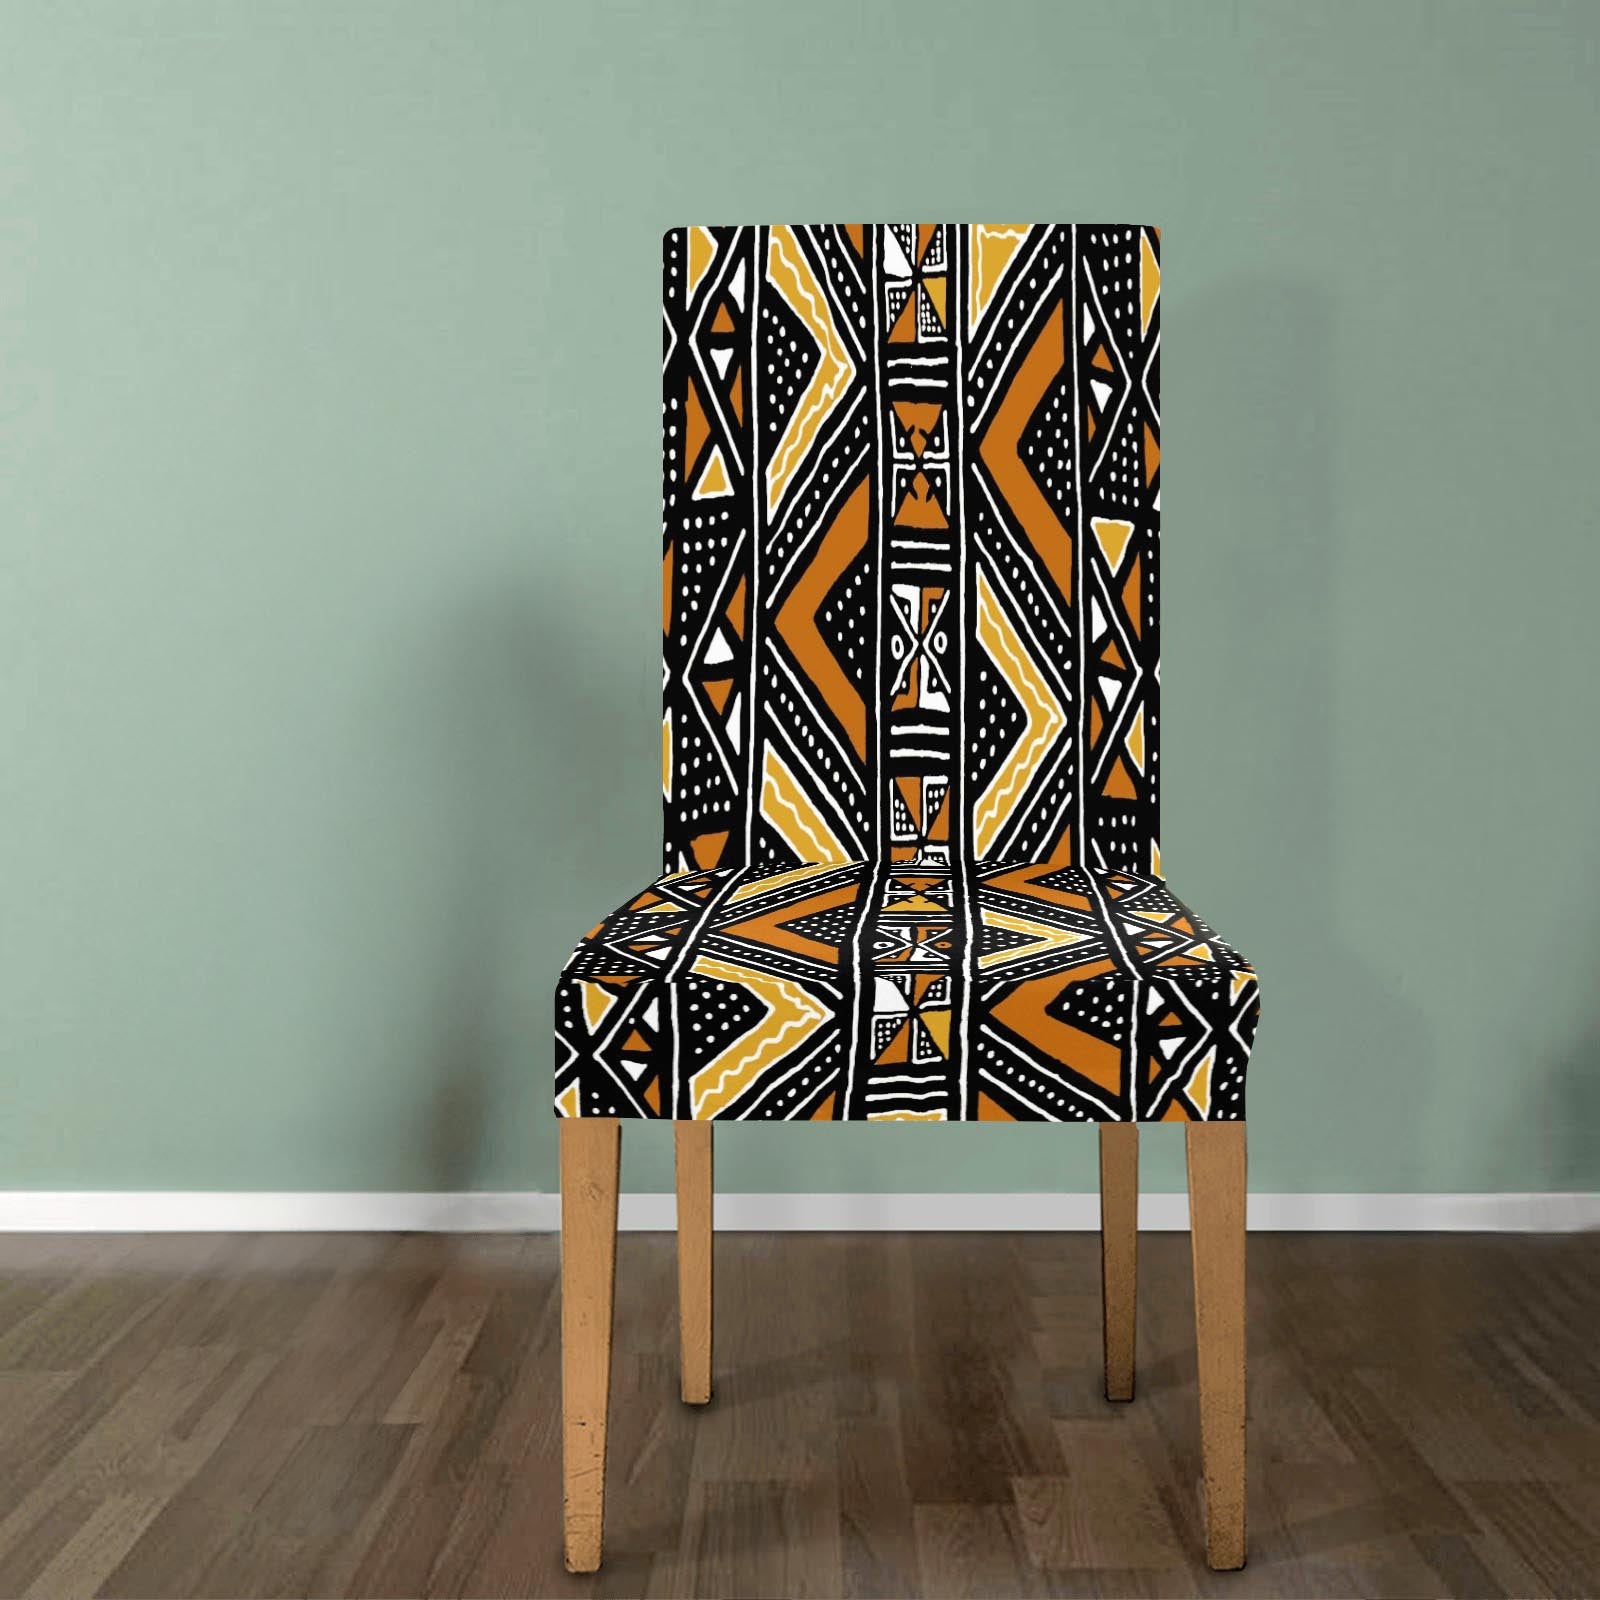 Removable African Print Dining Chair Covers In Mudcloth